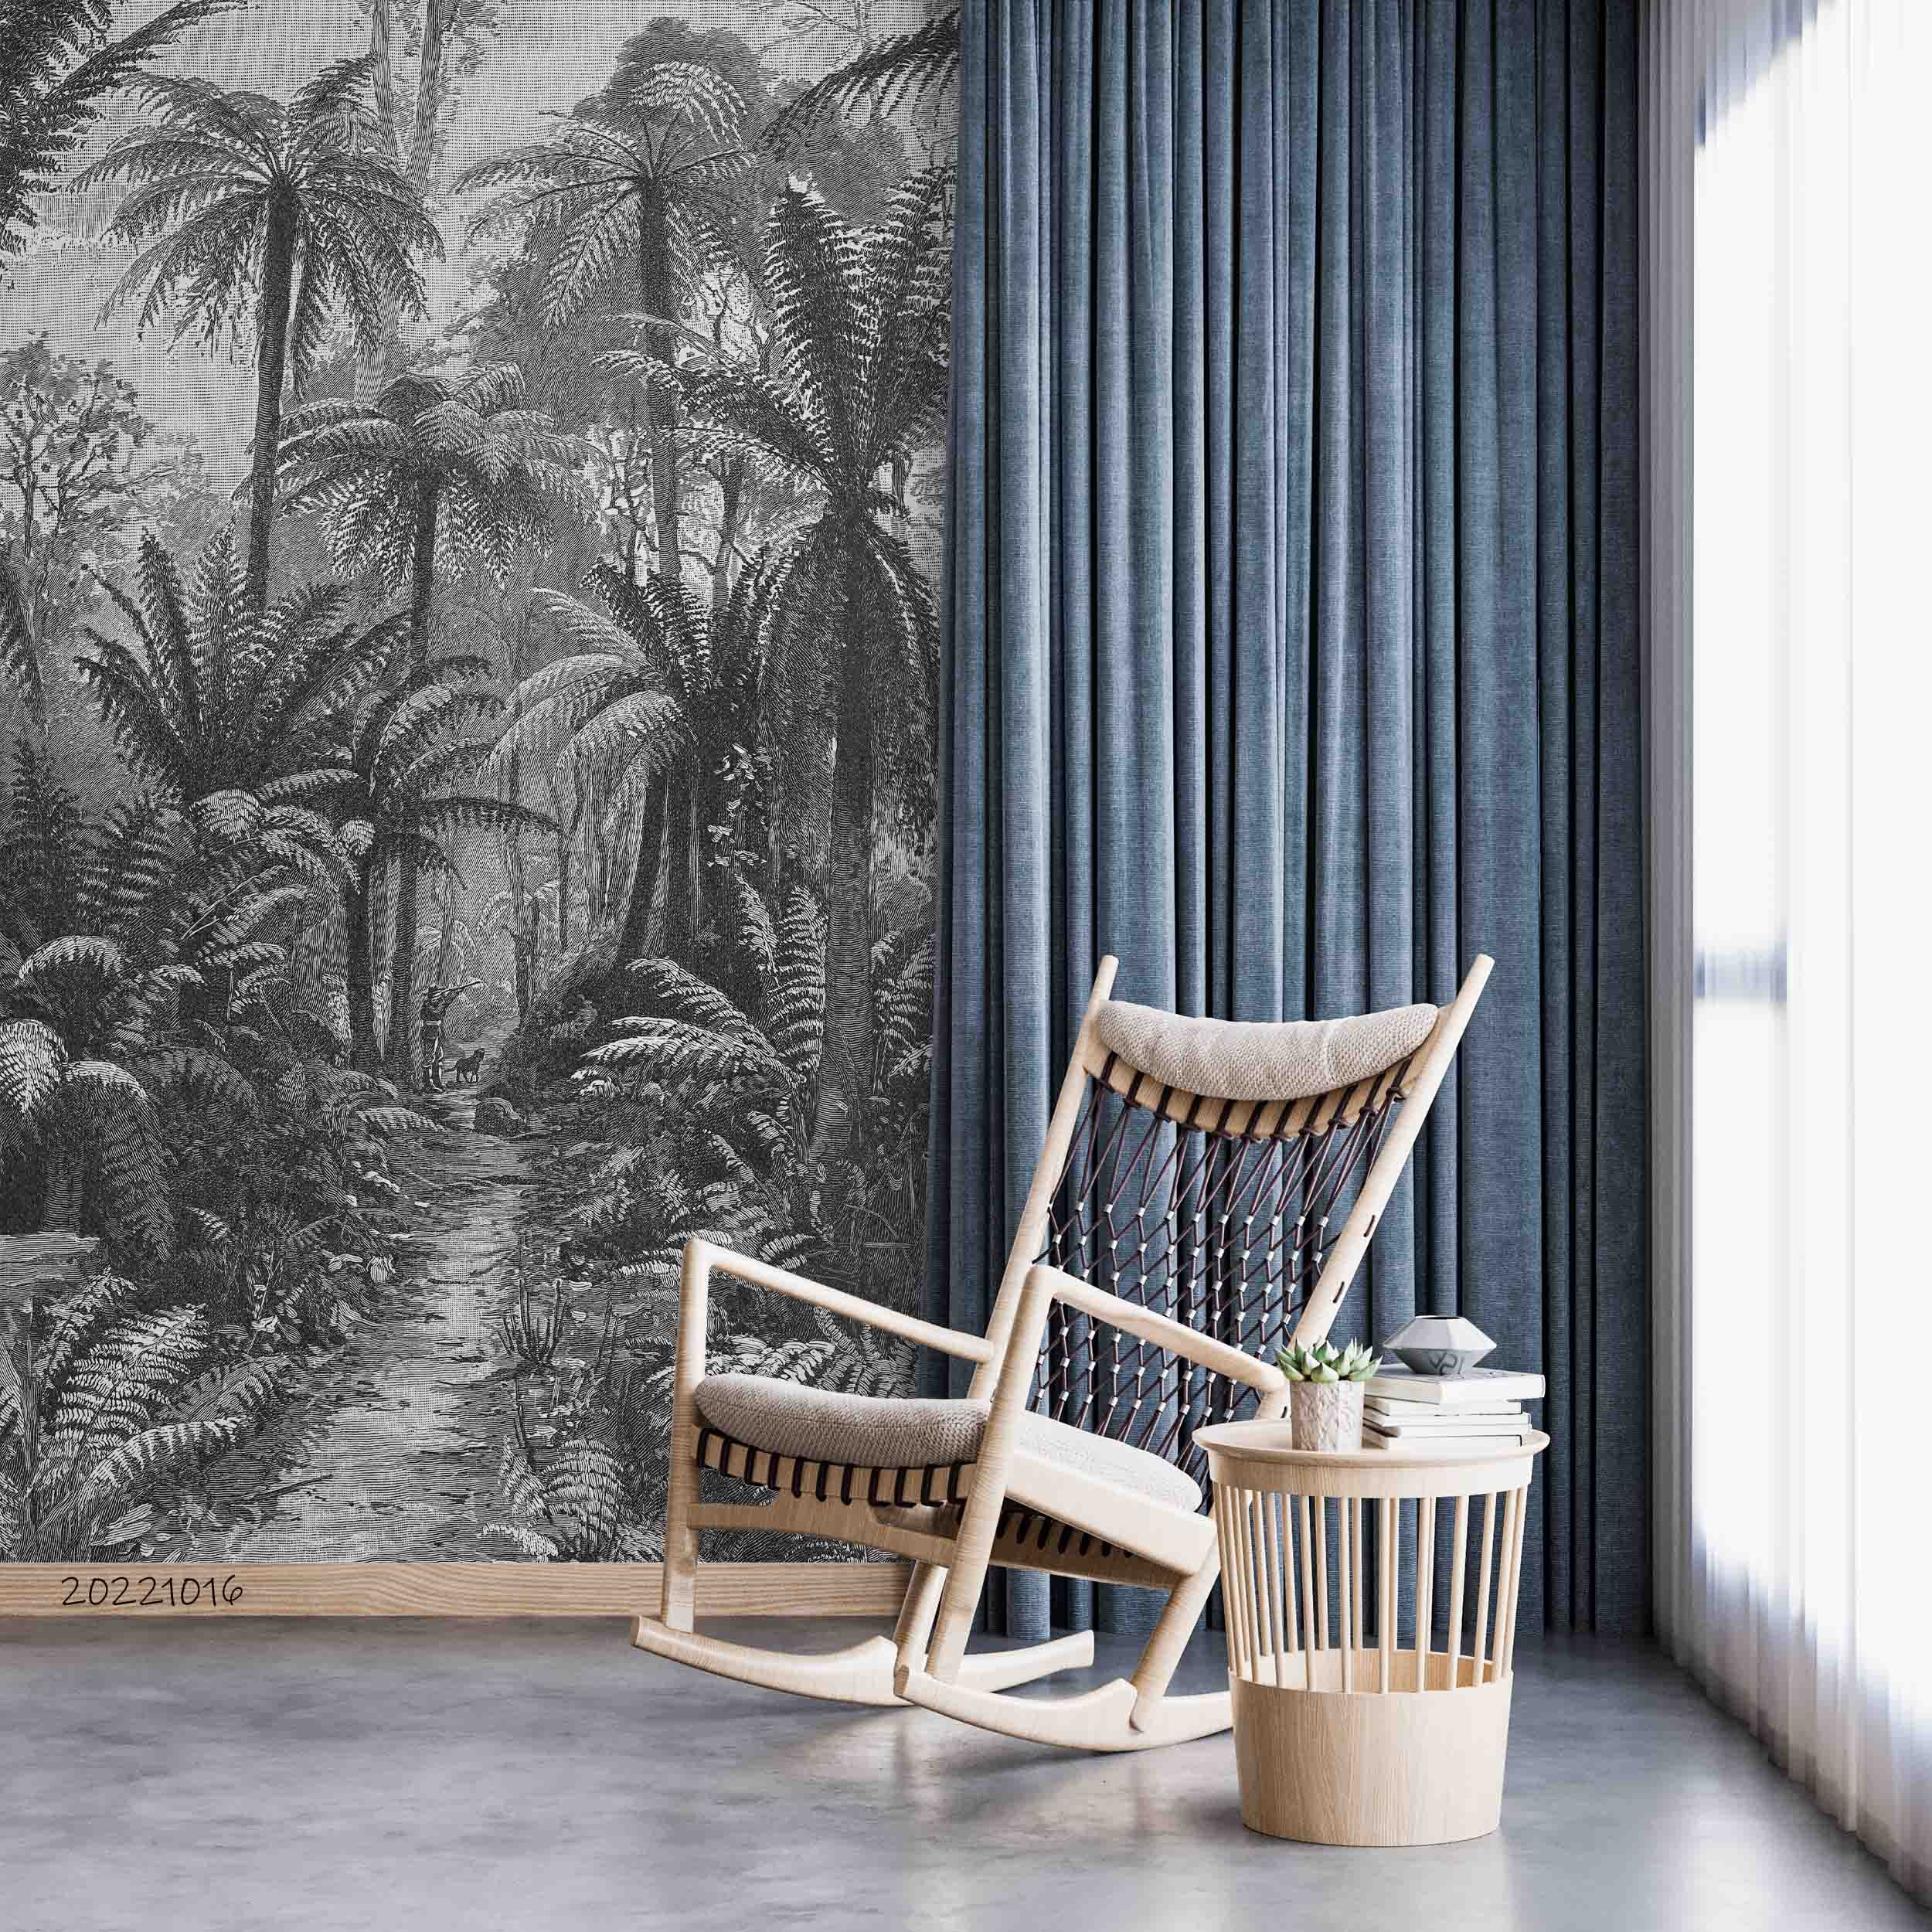 3D Vintage Tropical Forest Coconut Tree Wall Mural Wallpaper GD 1767- Jess Art Decoration